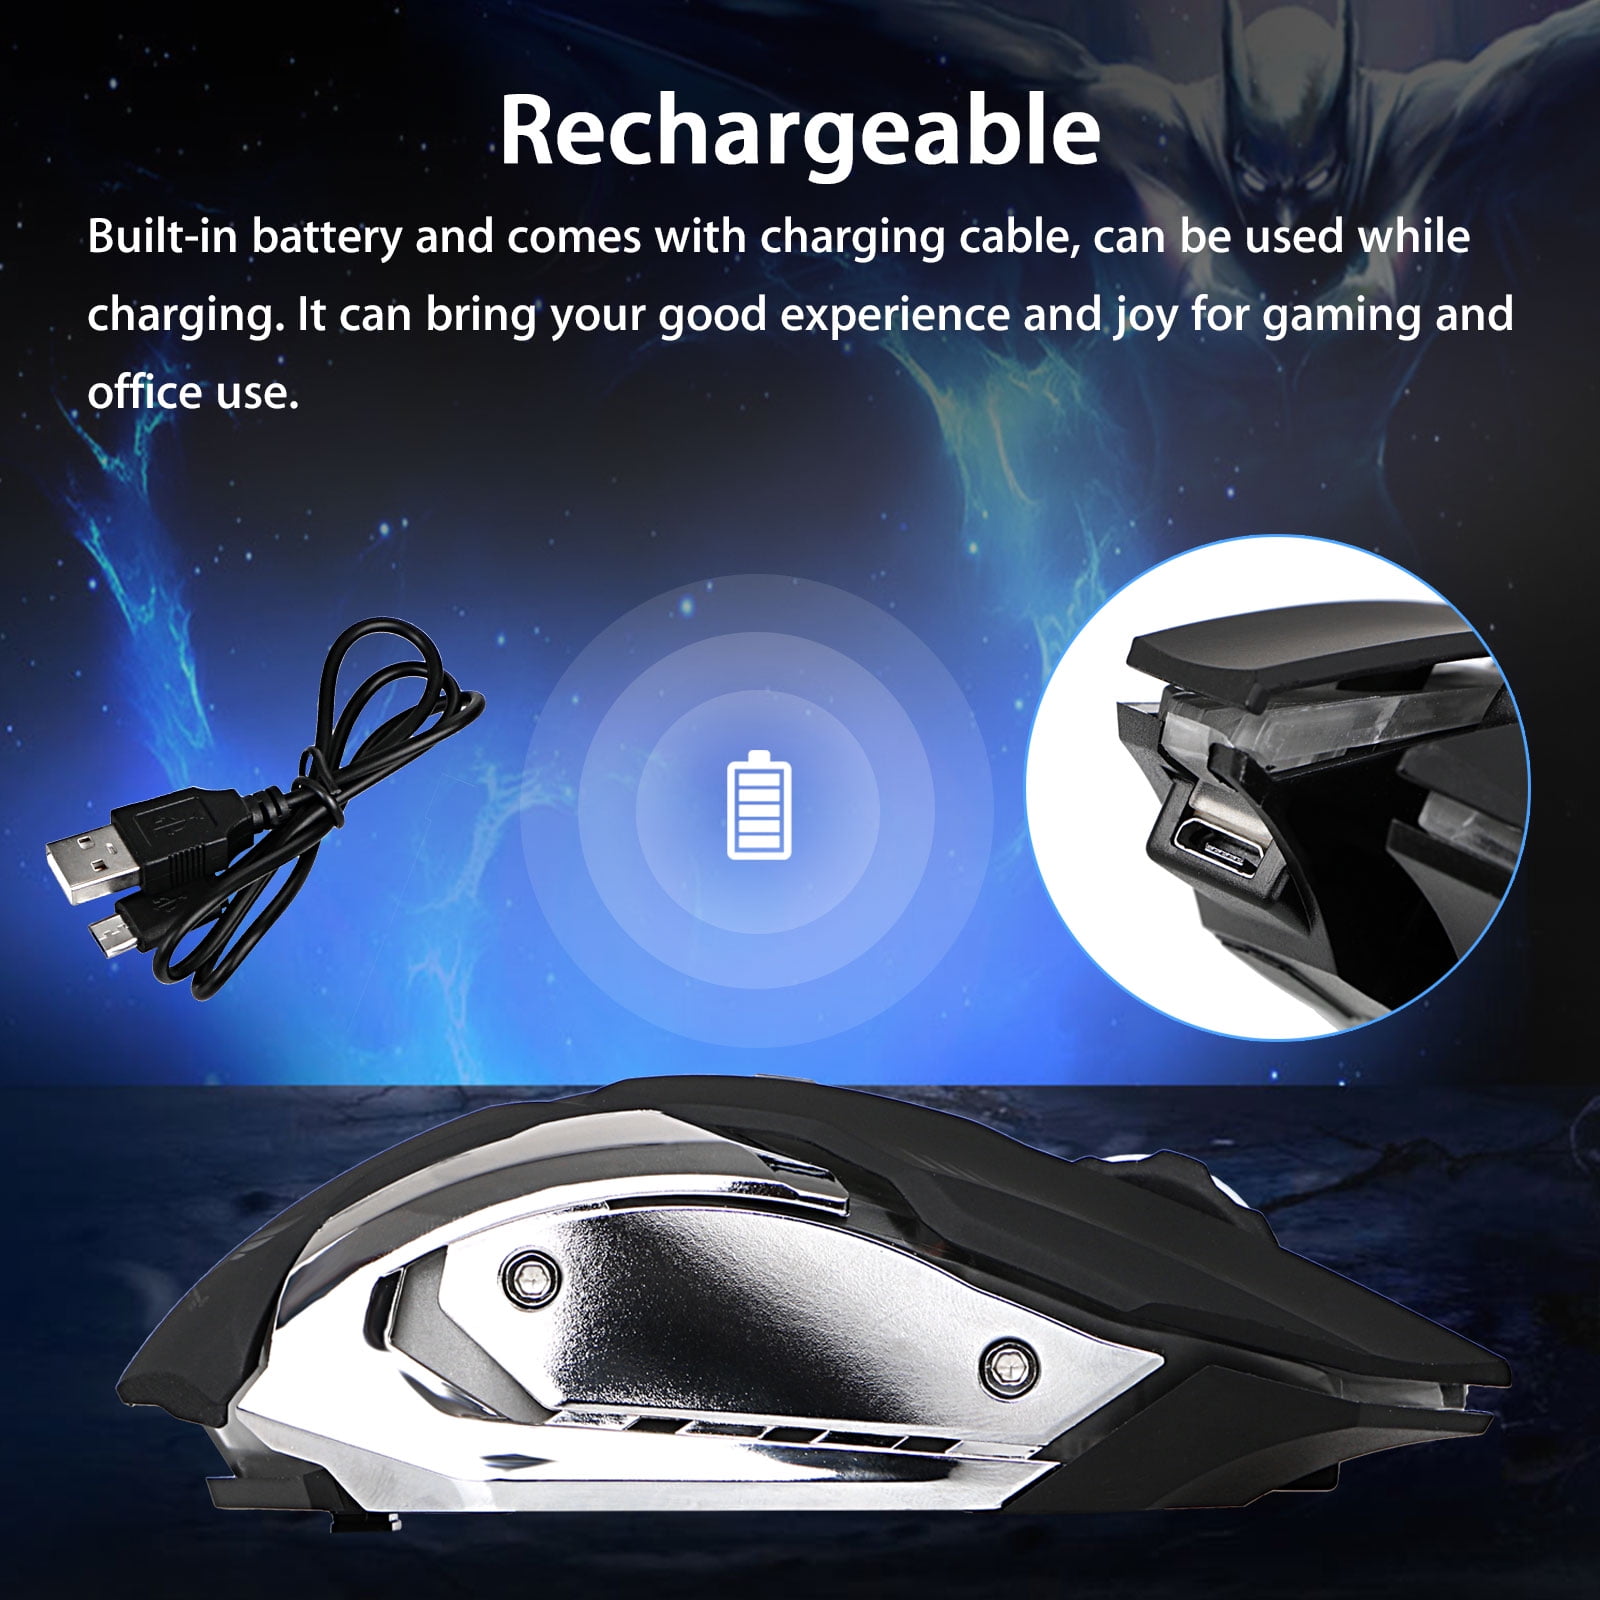 Bluetooth Gaming Mouse X70 Rechargeable Wireless Rgb 7 Color Backlit 4 Dpi 2400 1600 10 800 Usb Game Mouse For Computer Laptop Walmart Com Walmart Com